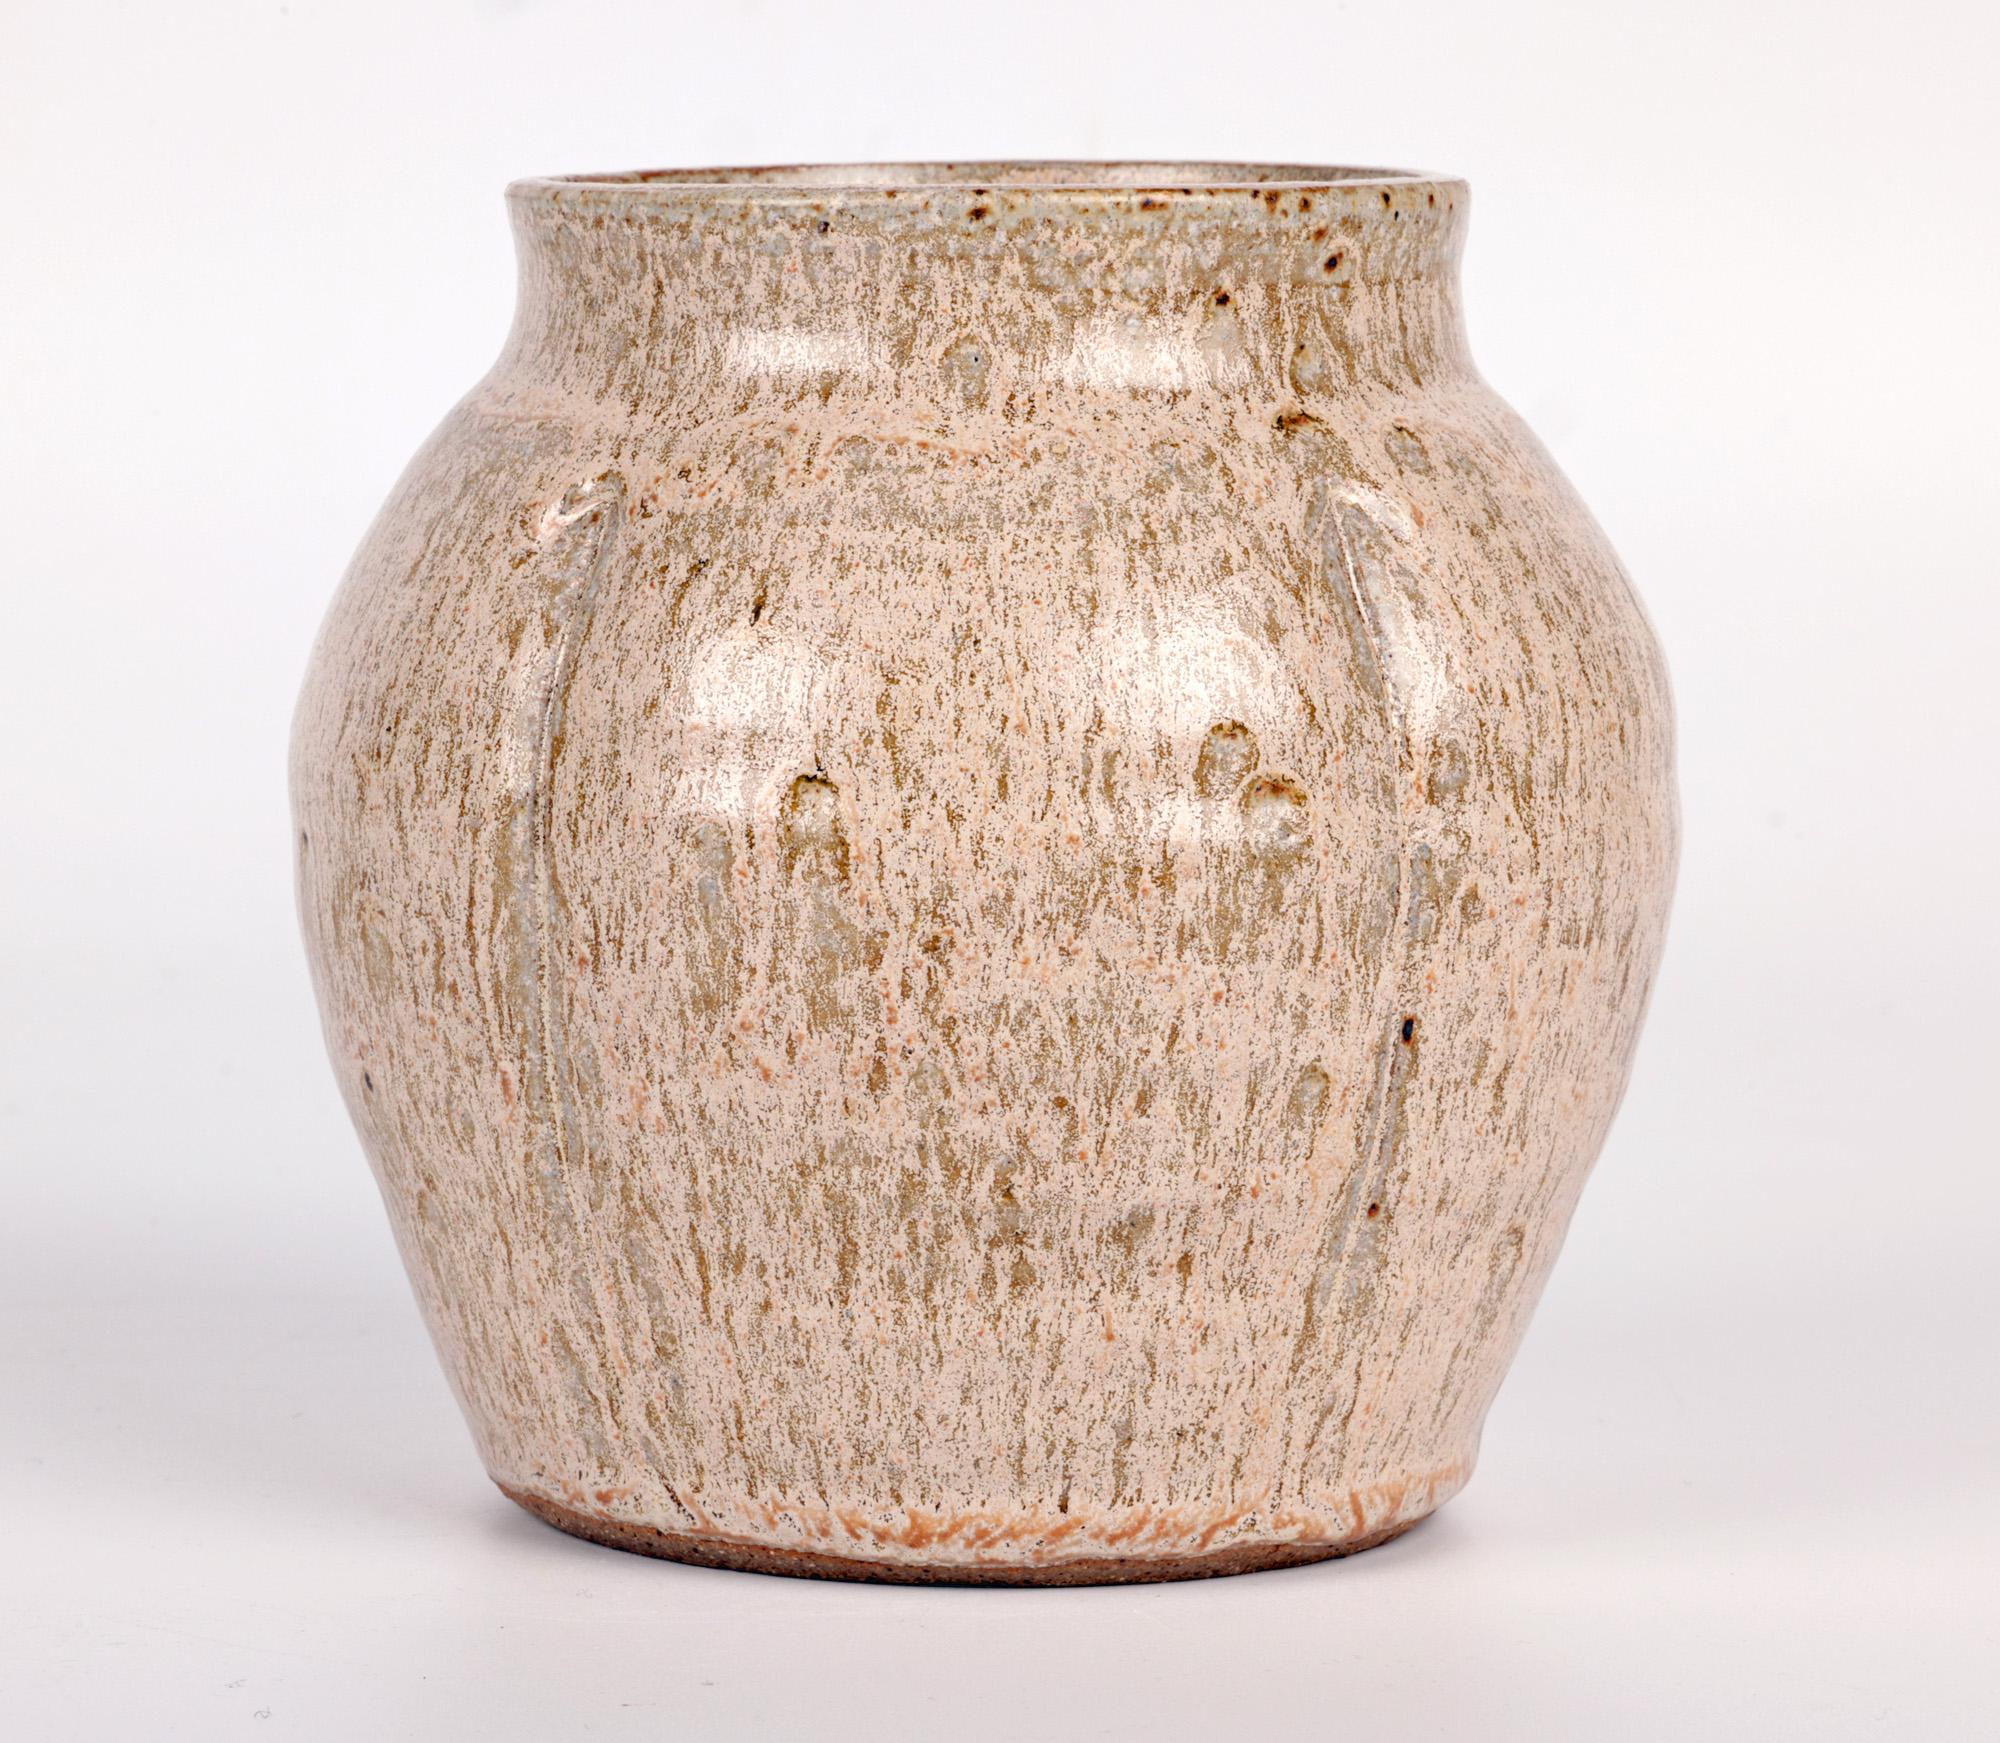 Sonia Lewis Studio Pottery Oatmeal Glazed Vase In Good Condition For Sale In Bishop's Stortford, Hertfordshire